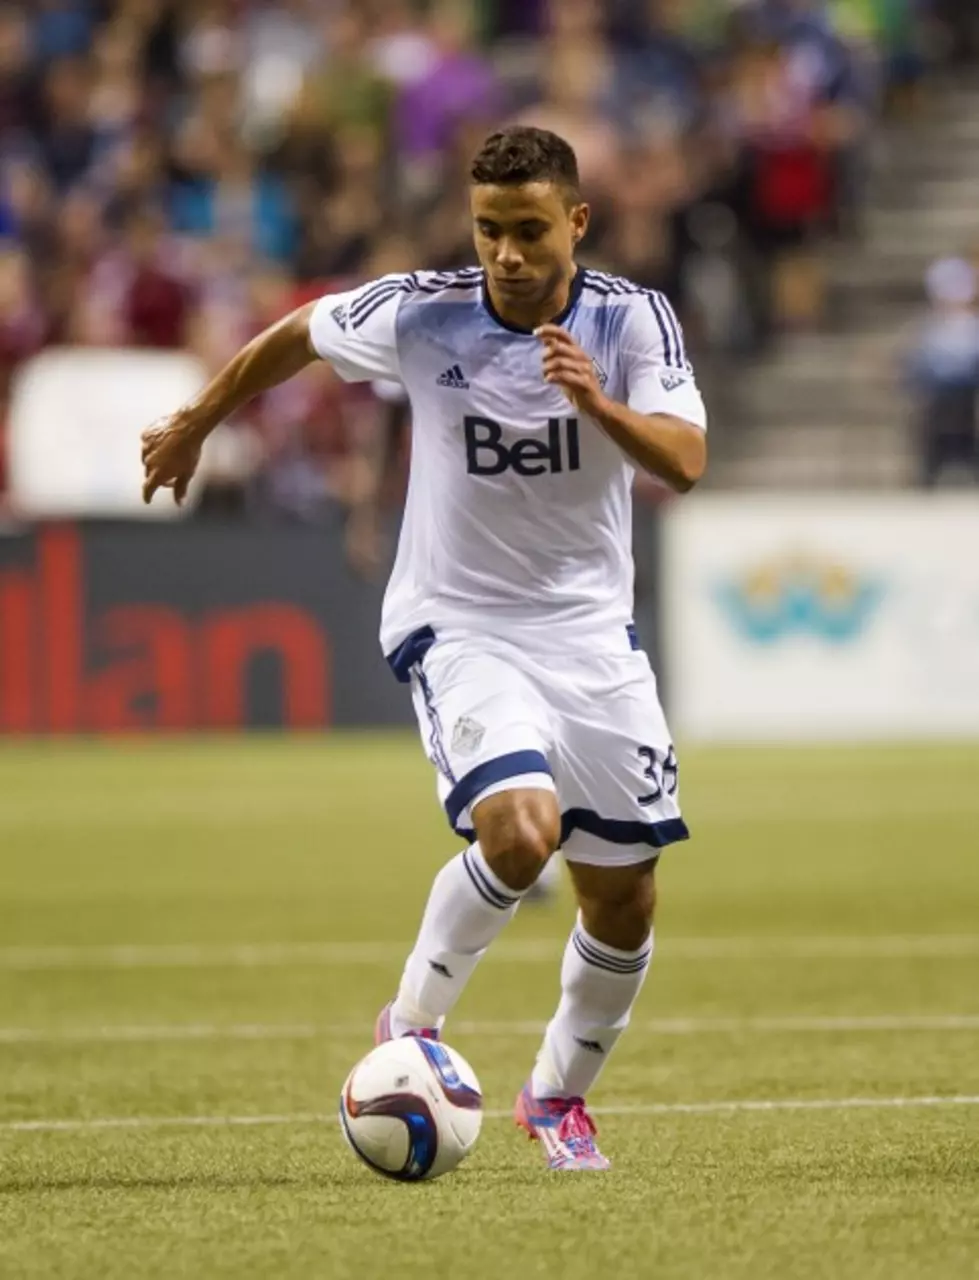 Vancouver Whitecaps Win Over Olympia Moves into a Tie With Sounders